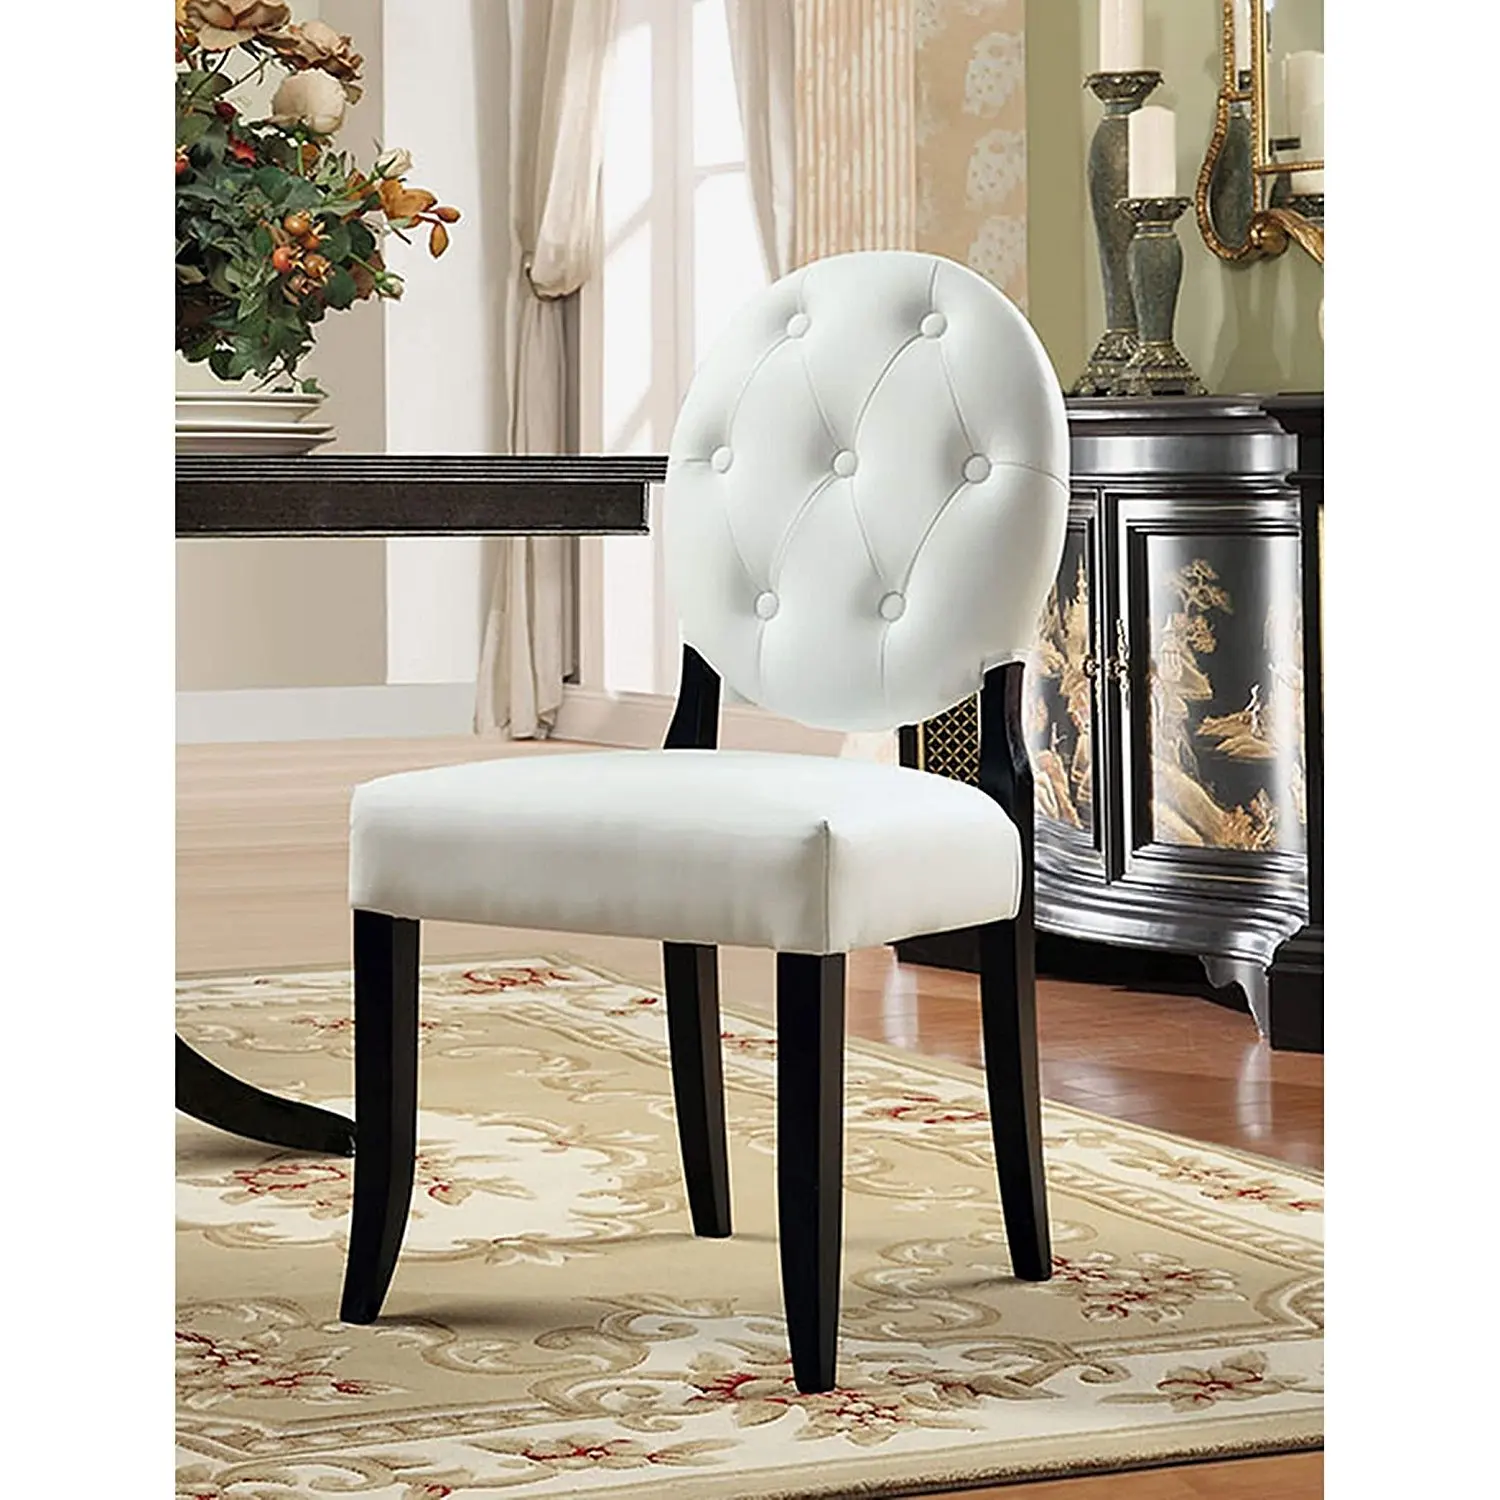 Cheap White Tufted Dining Chair, find White Tufted Dining Chair deals